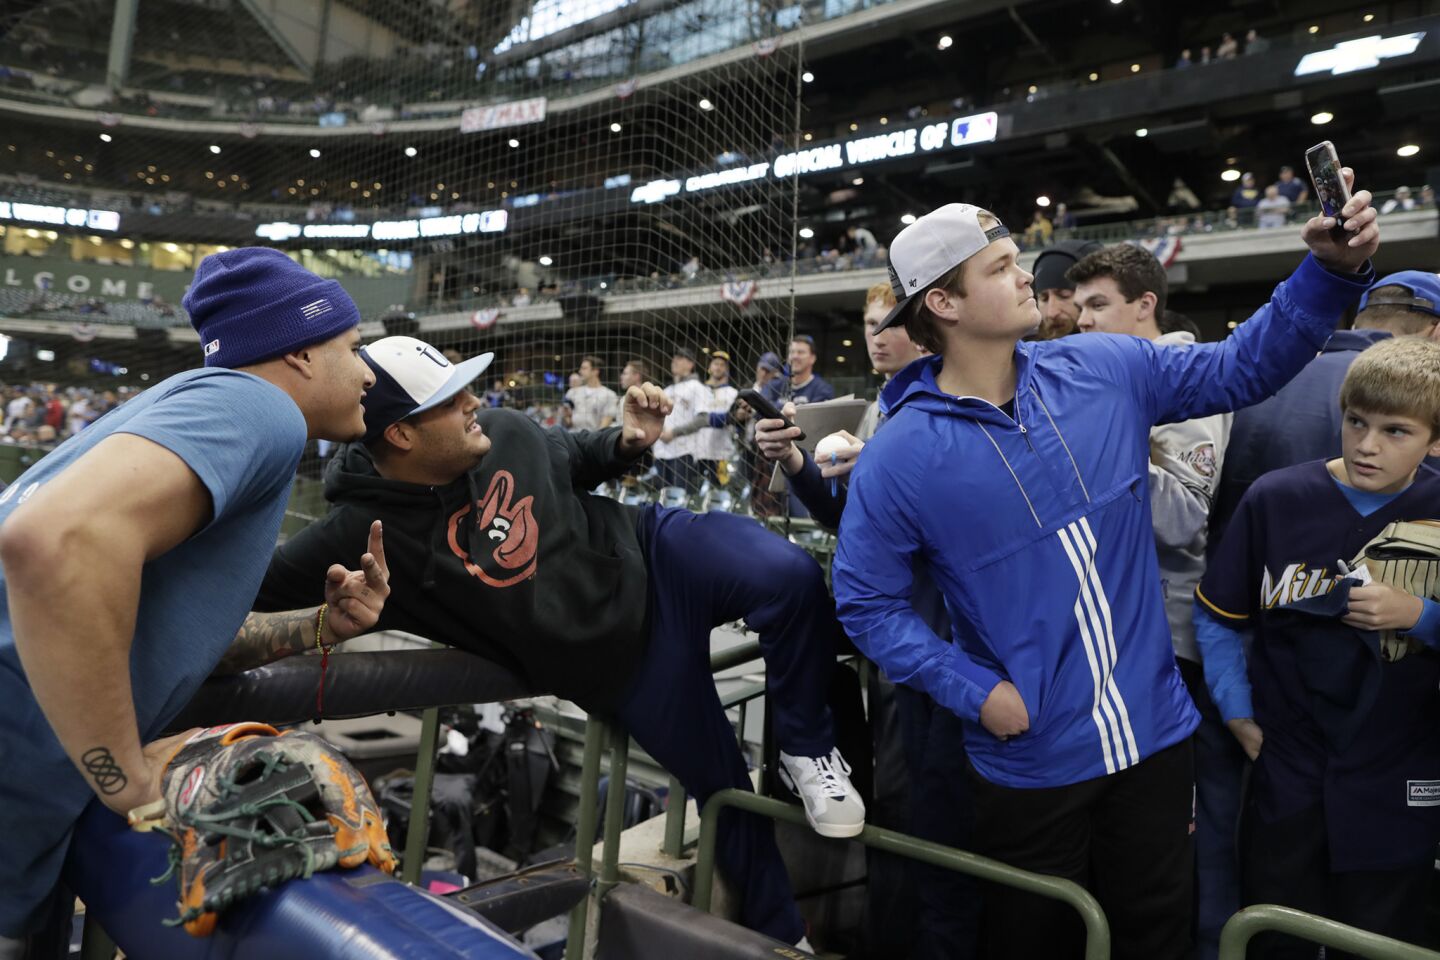 Fans take photos with Manny Machado before Game 7.